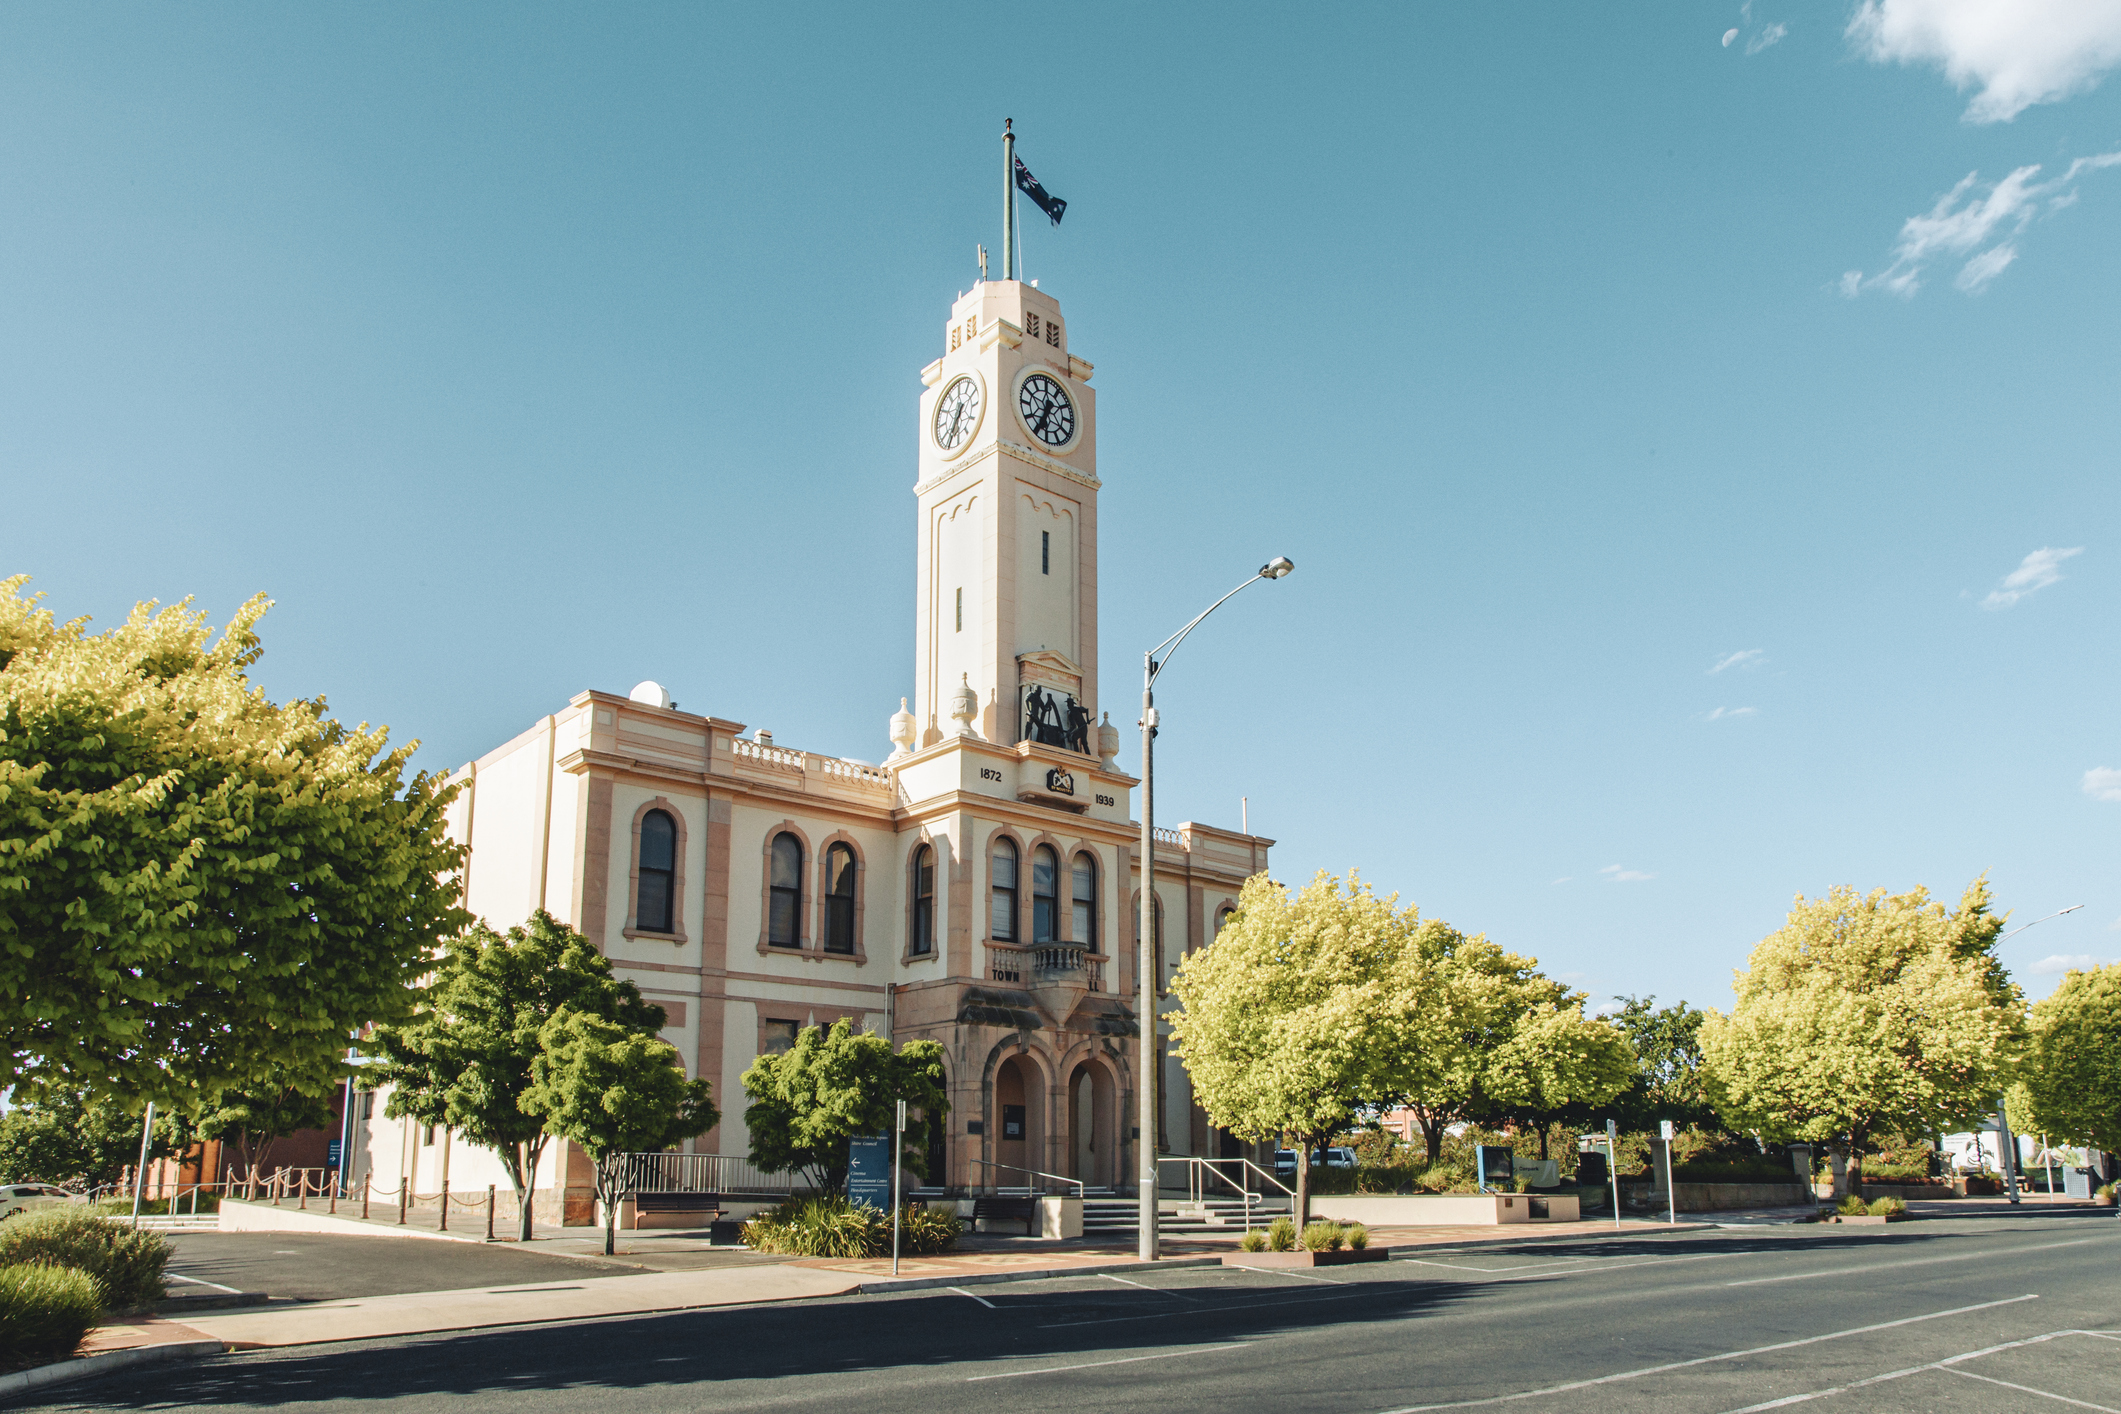 Stawell, Victoria: Your New Home in Nursing!